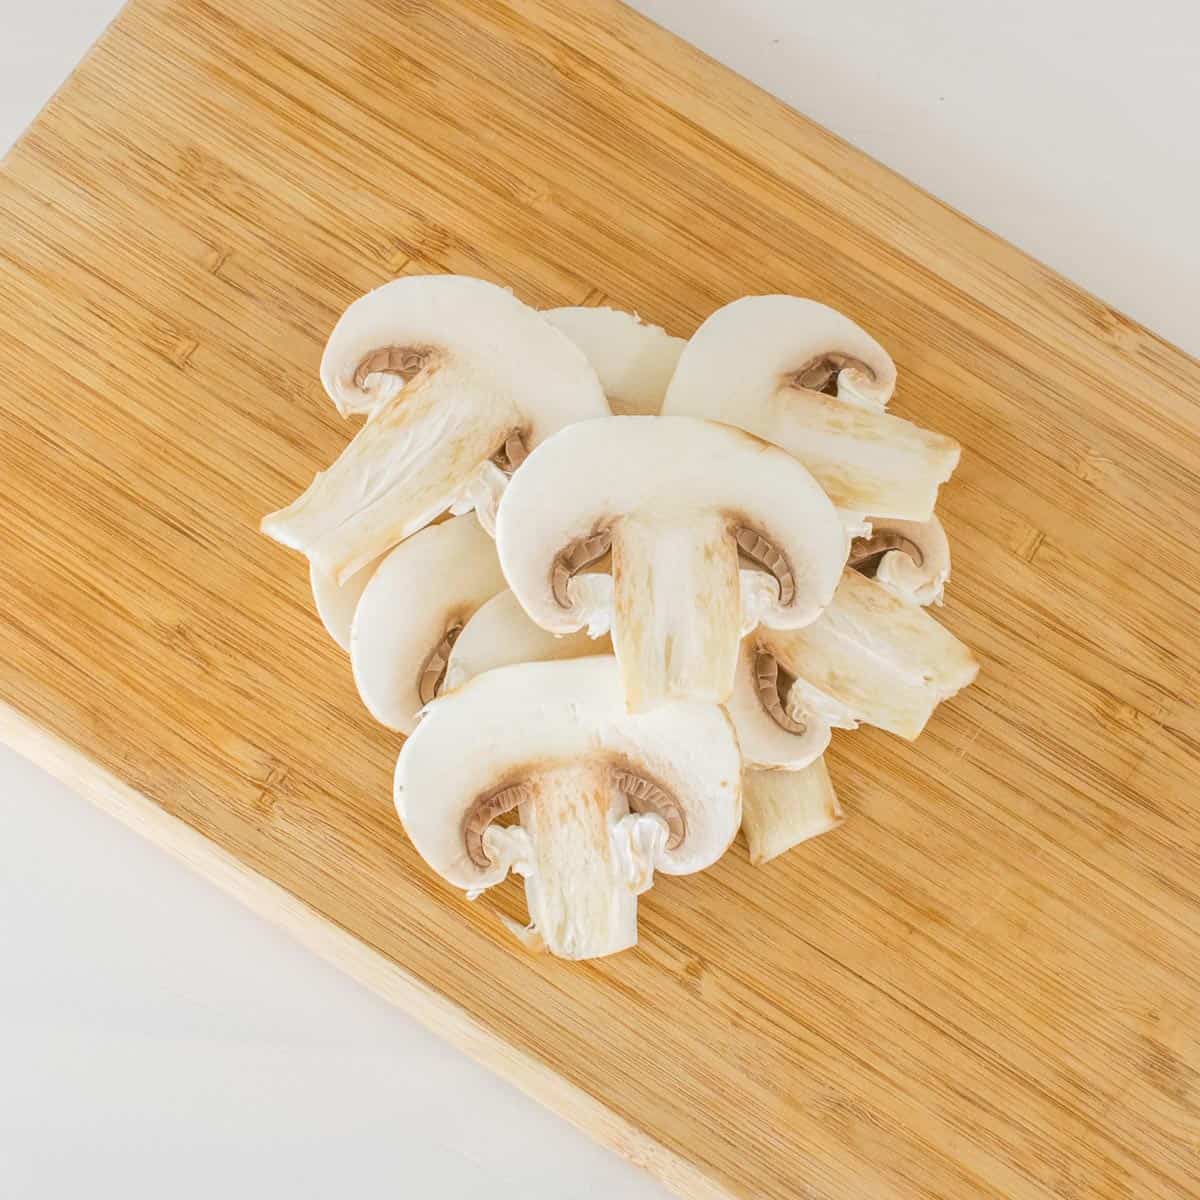 chopped mushrooms on a wooden board.